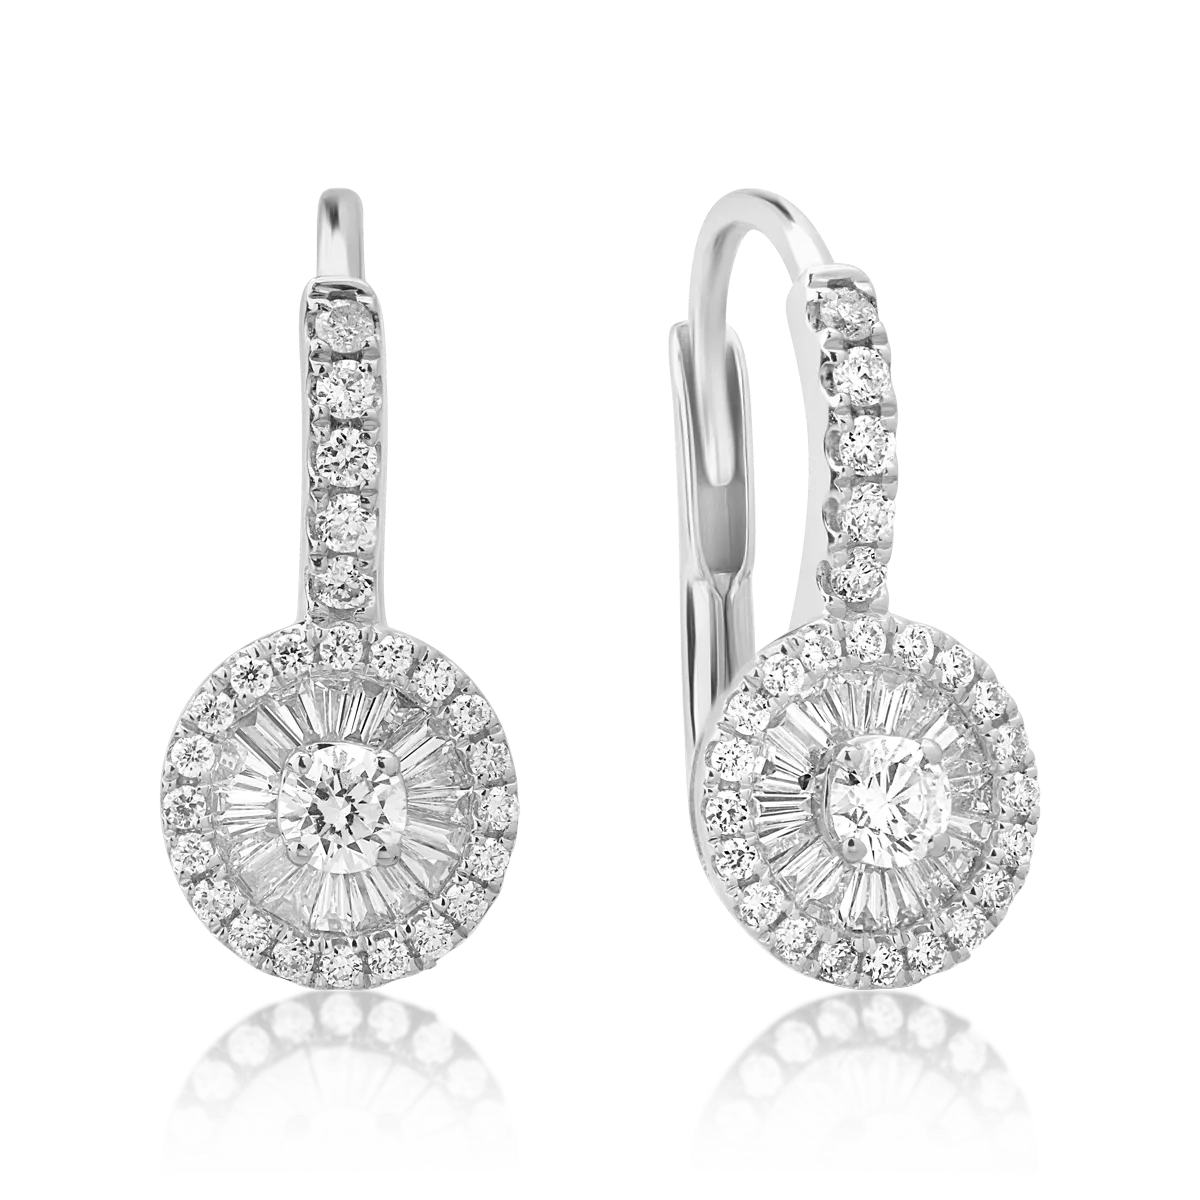 18K white gold earrings with 0.48ct diamonds